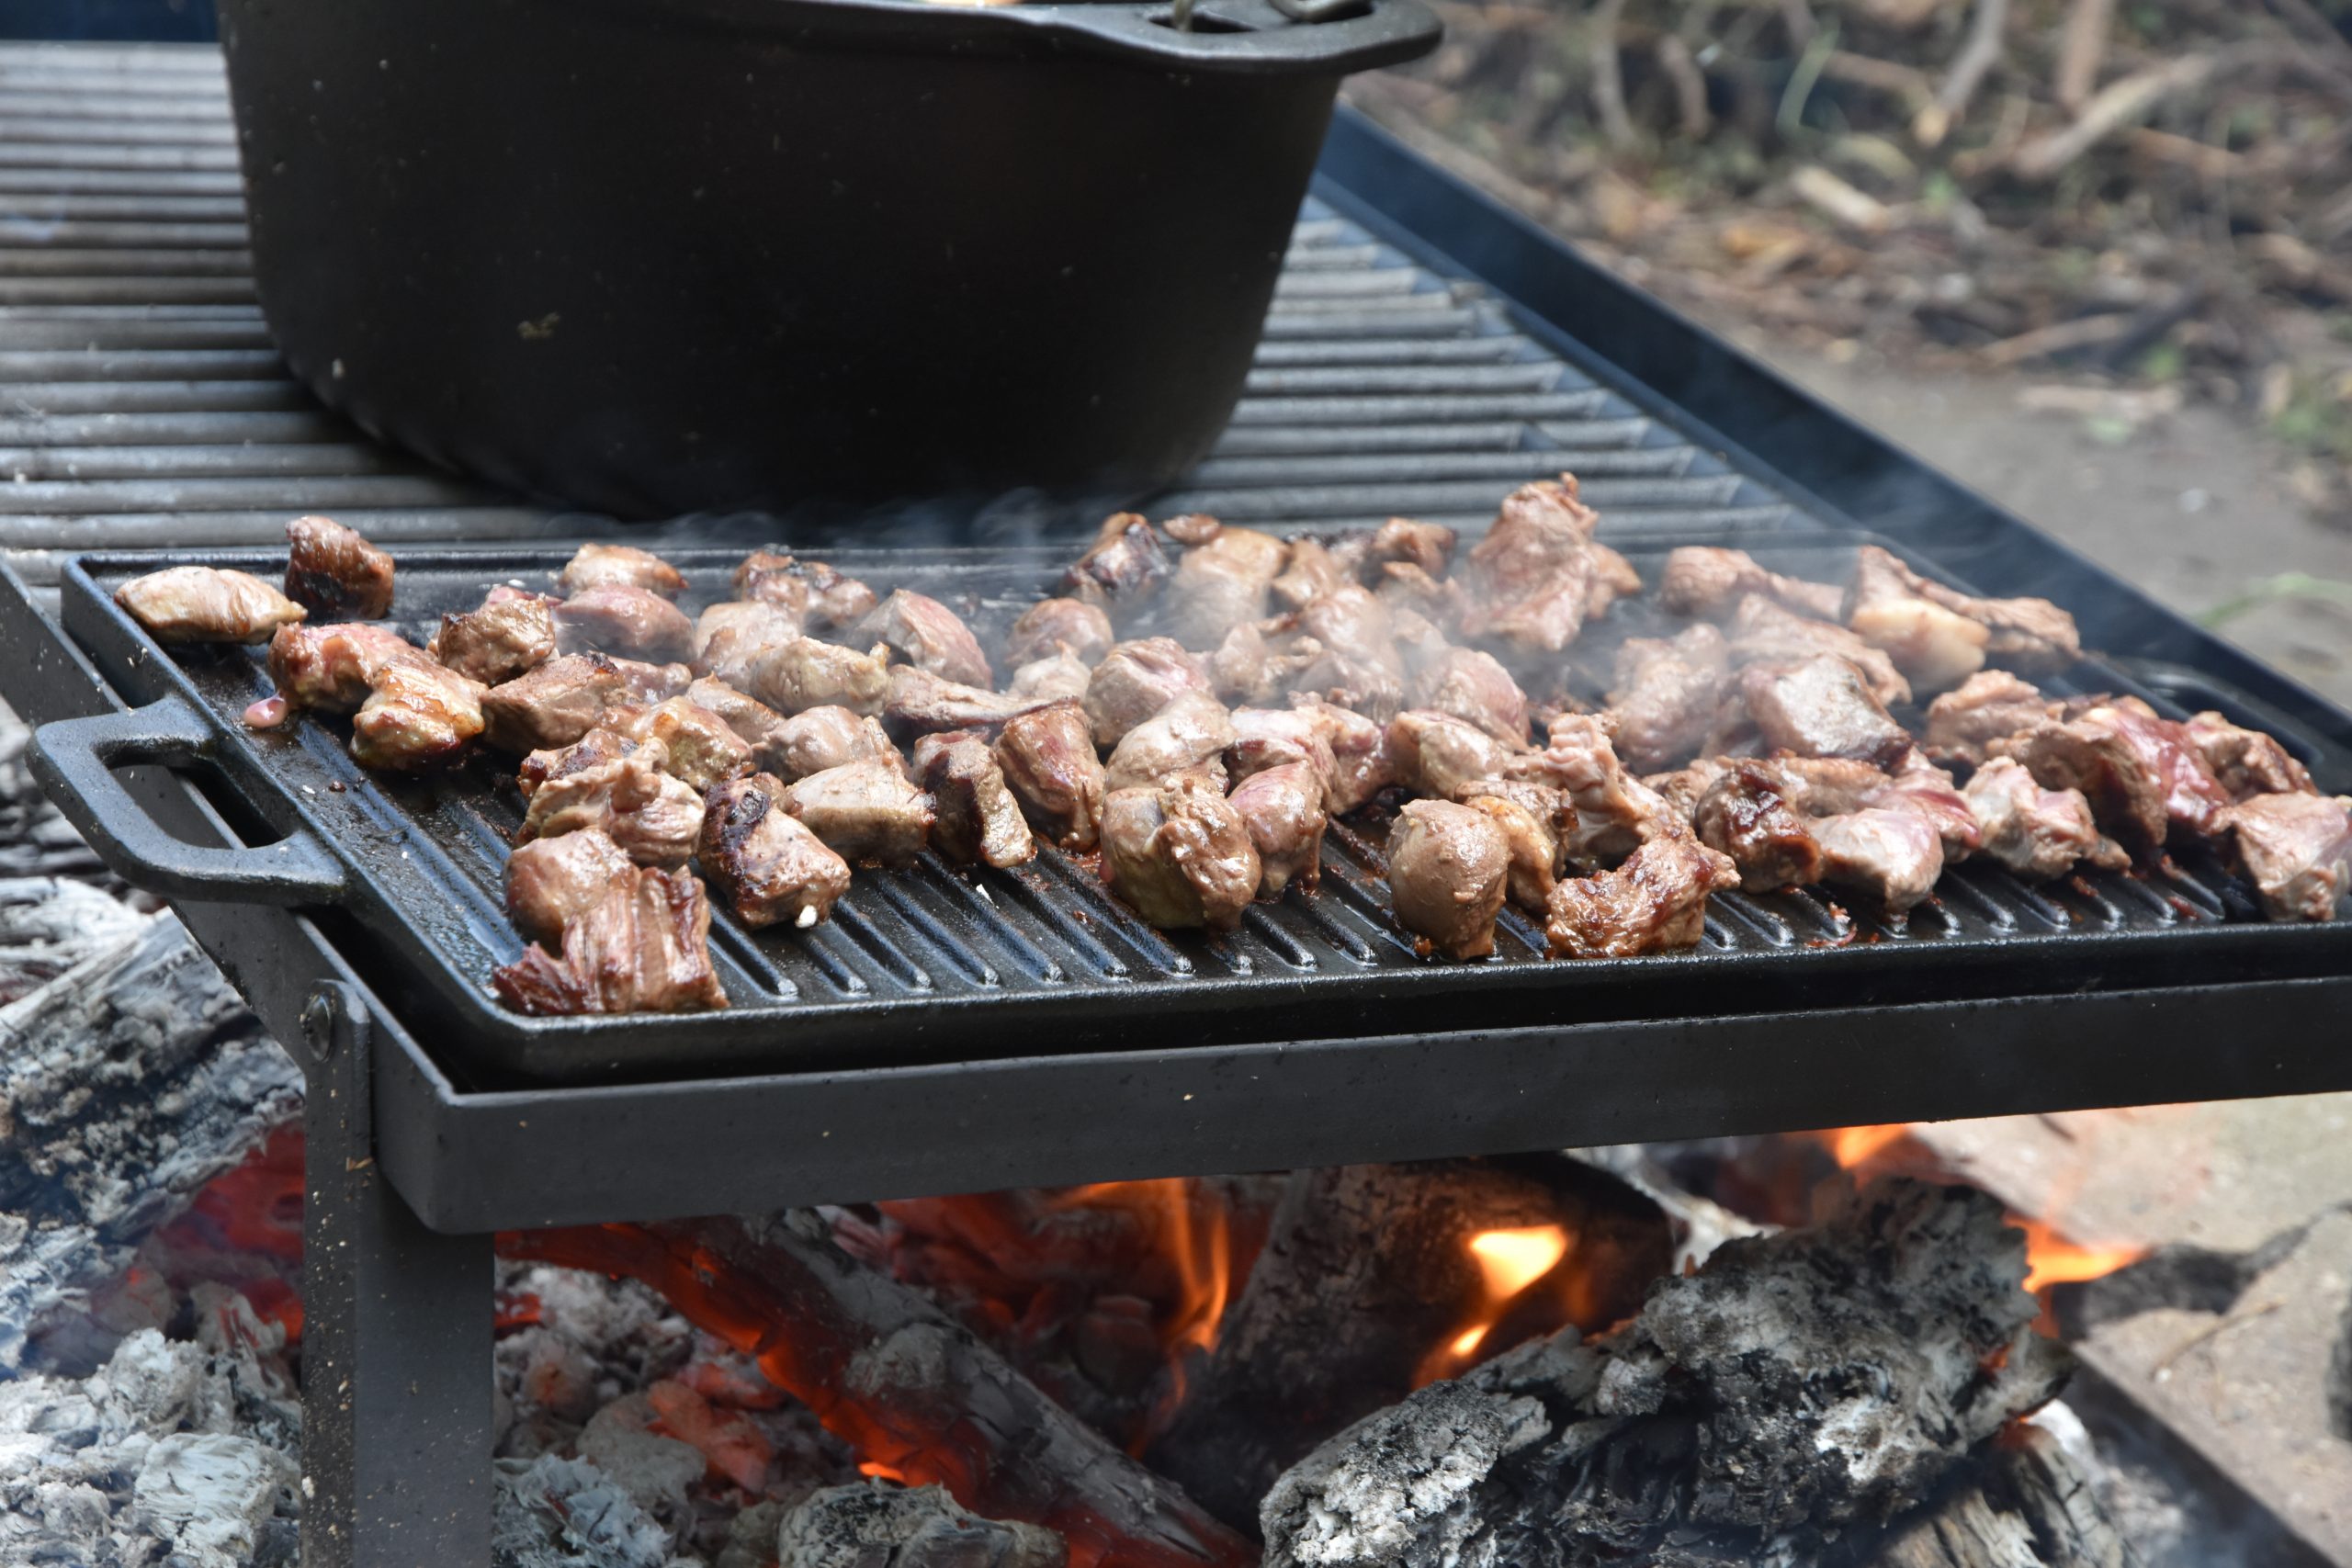 Bon-fire Grill with grill grids of cast iron and foldable legs. Photo credit: @seatroutguidefyn